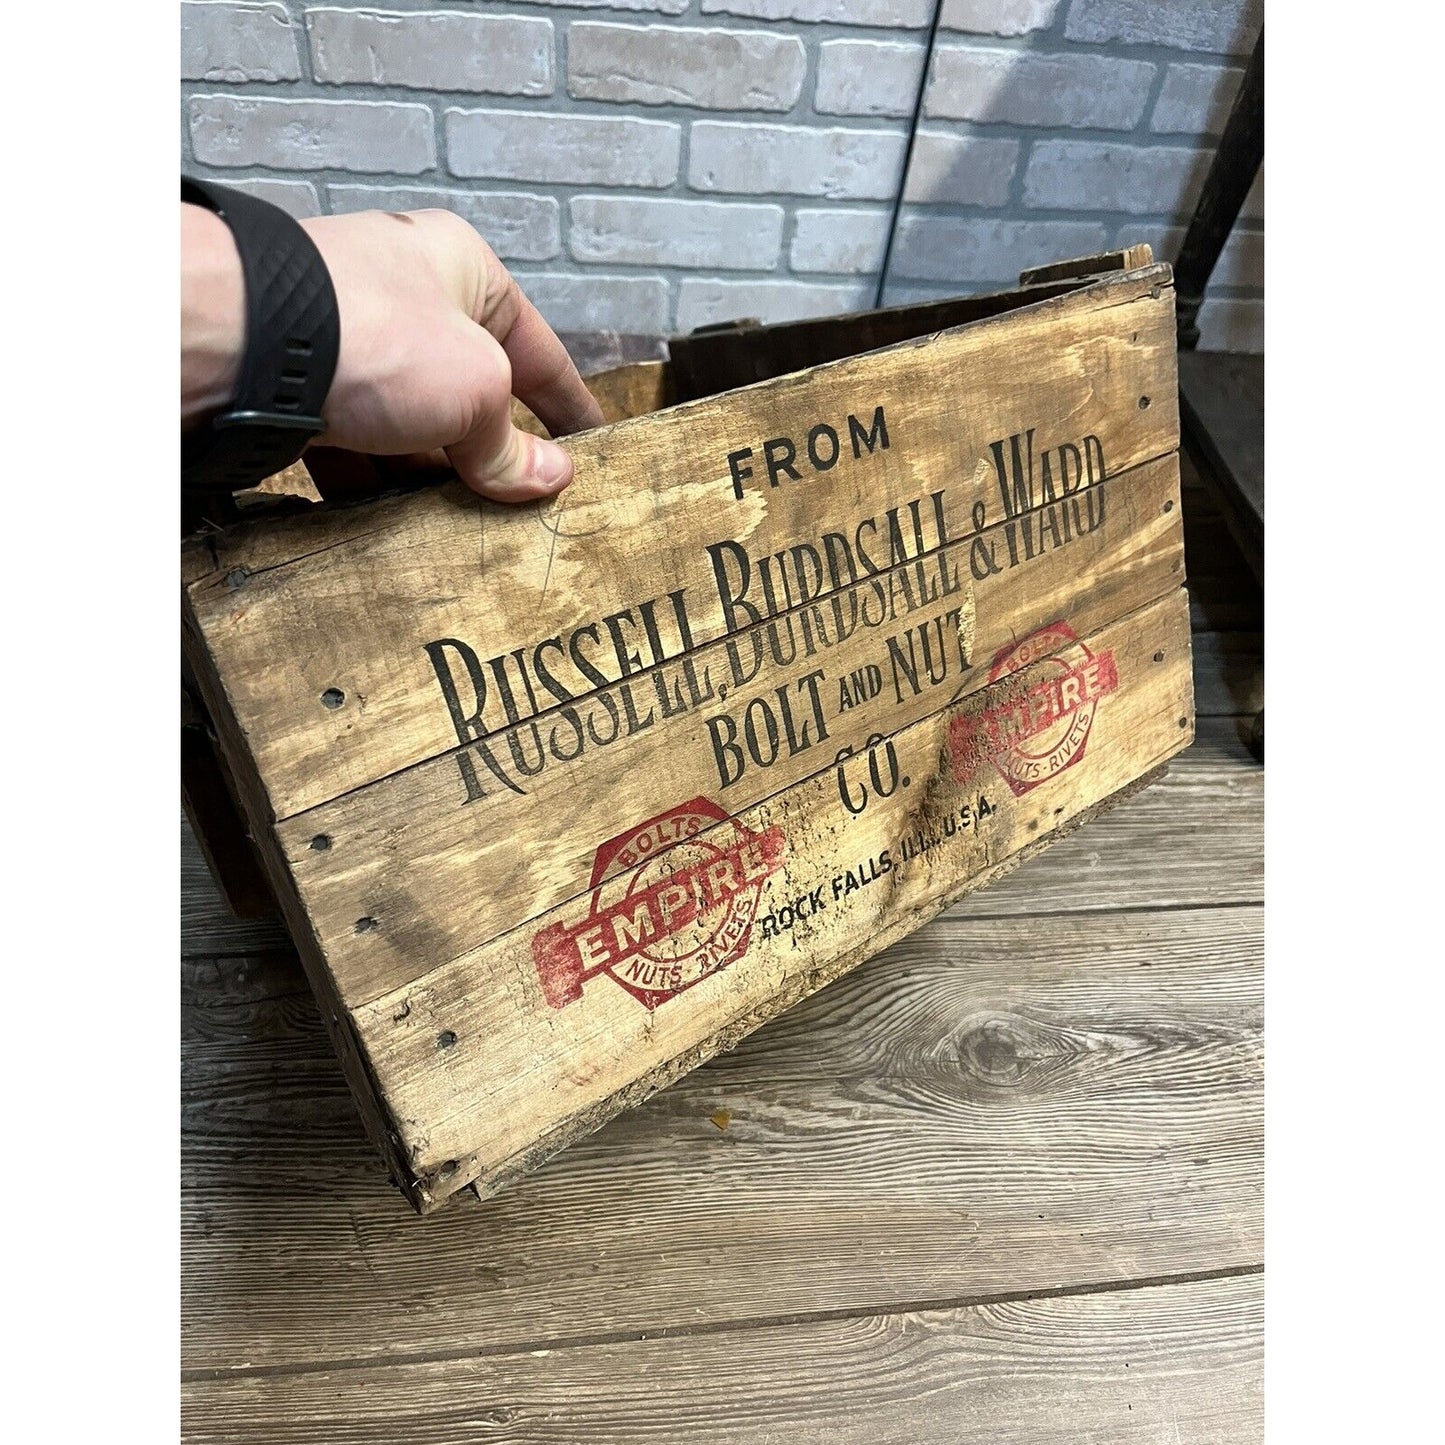 Vintage Russell, Burdsall, & Ward Bolt And Nut Co. Rock Falls, IL Wooden Crate